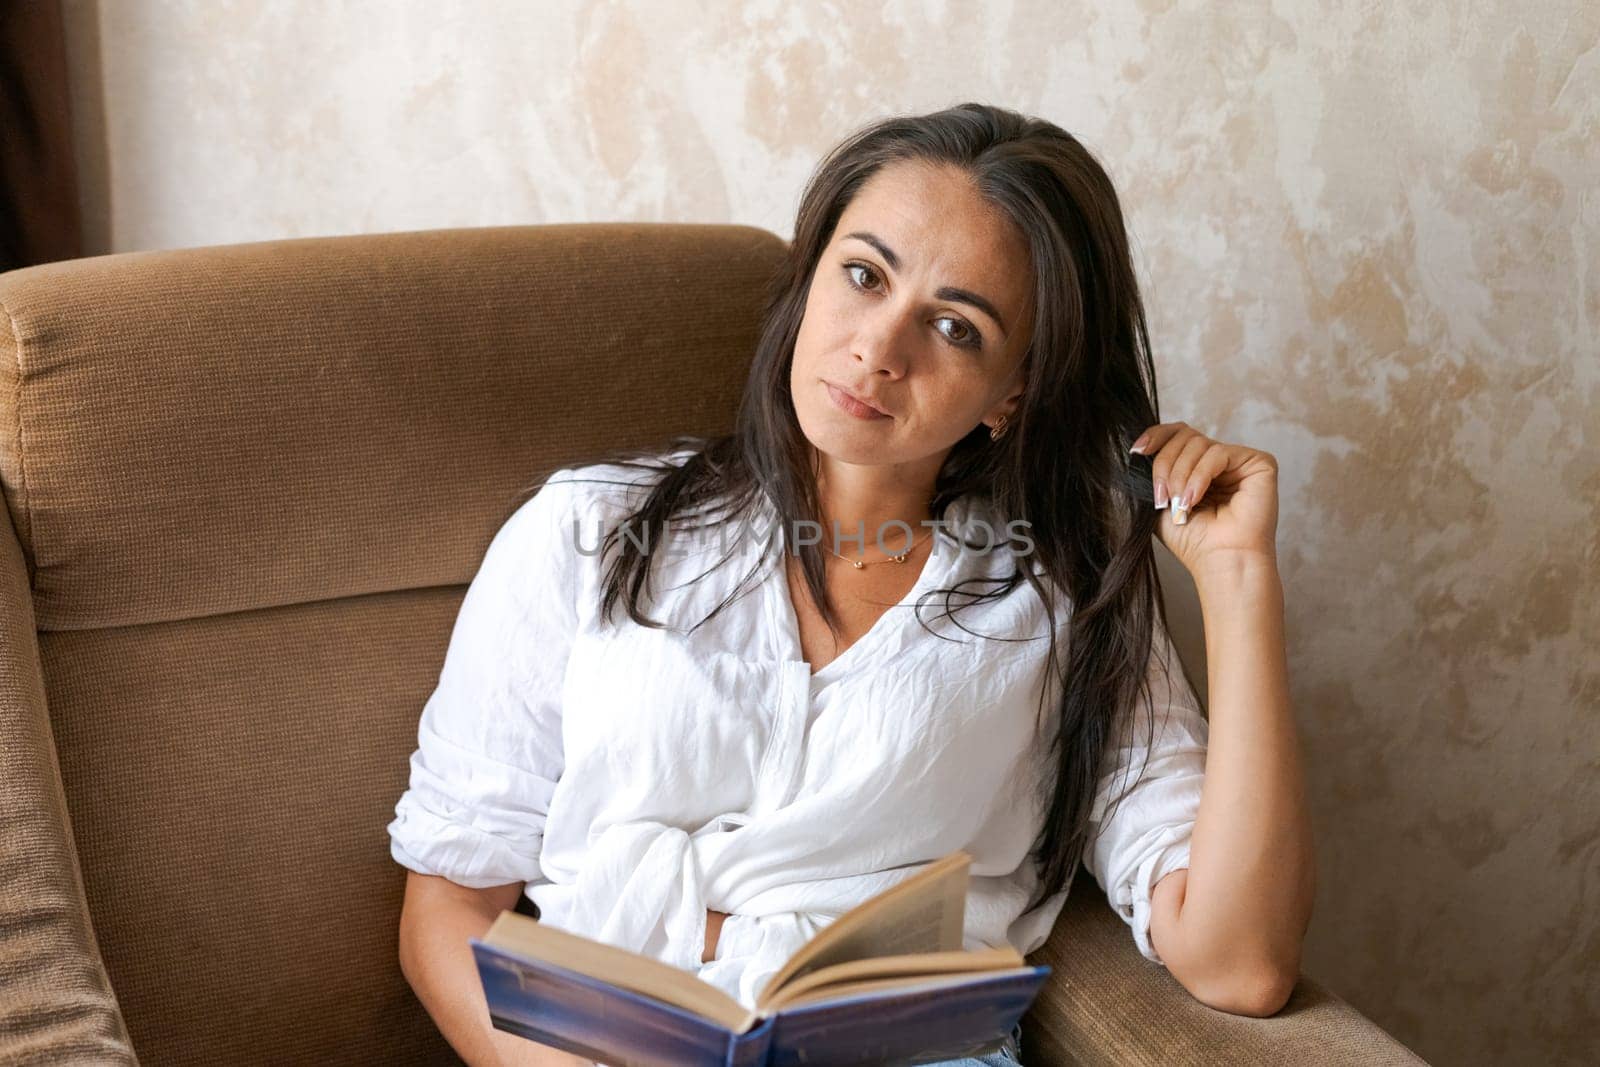 woman sitting on a chair holding a book in her hand, lifestyle concept